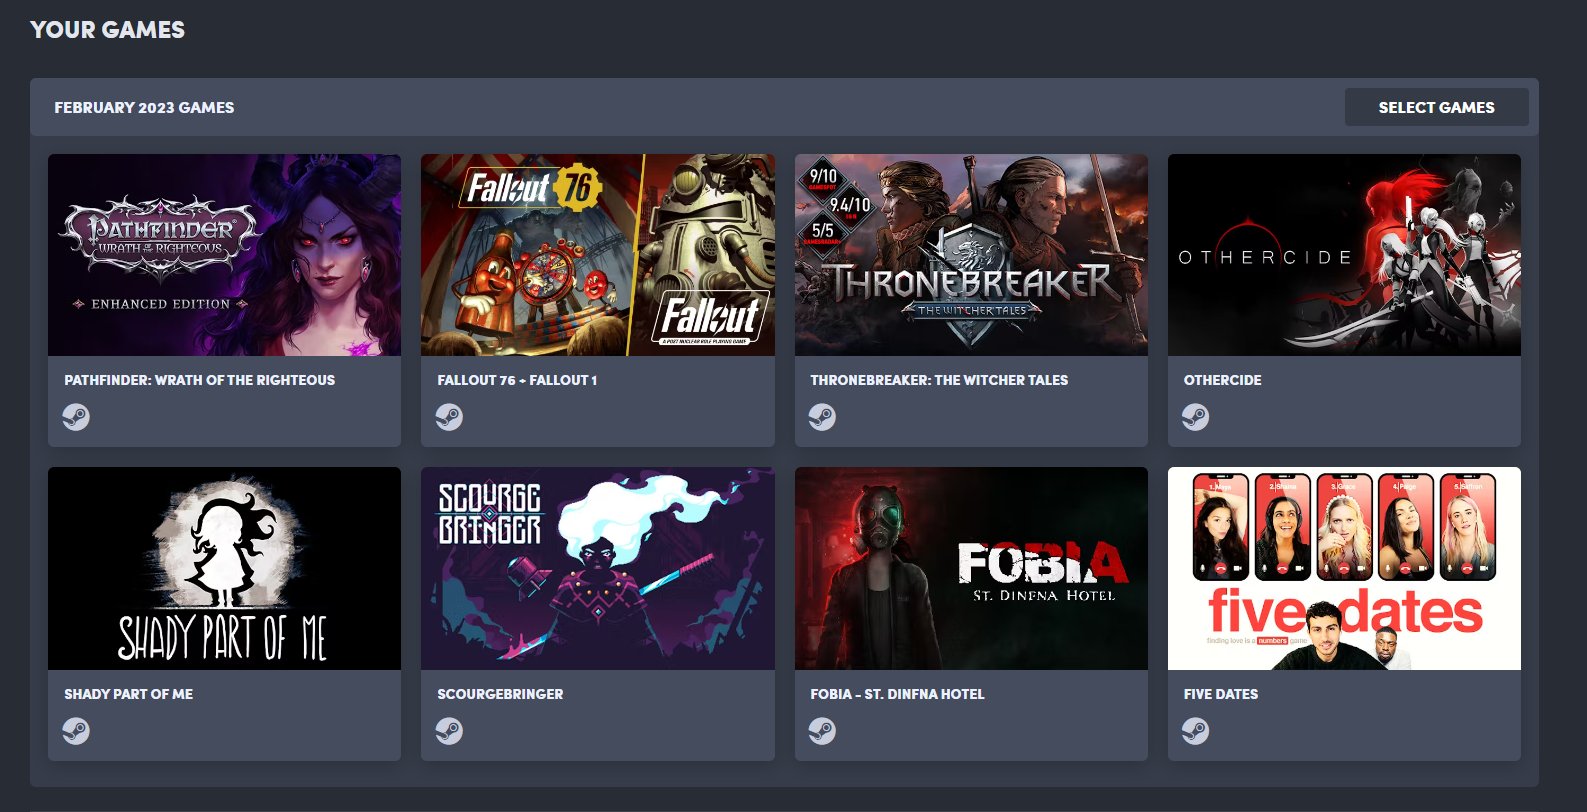 Humble Choice September 2023 - 8 Steam games for $12